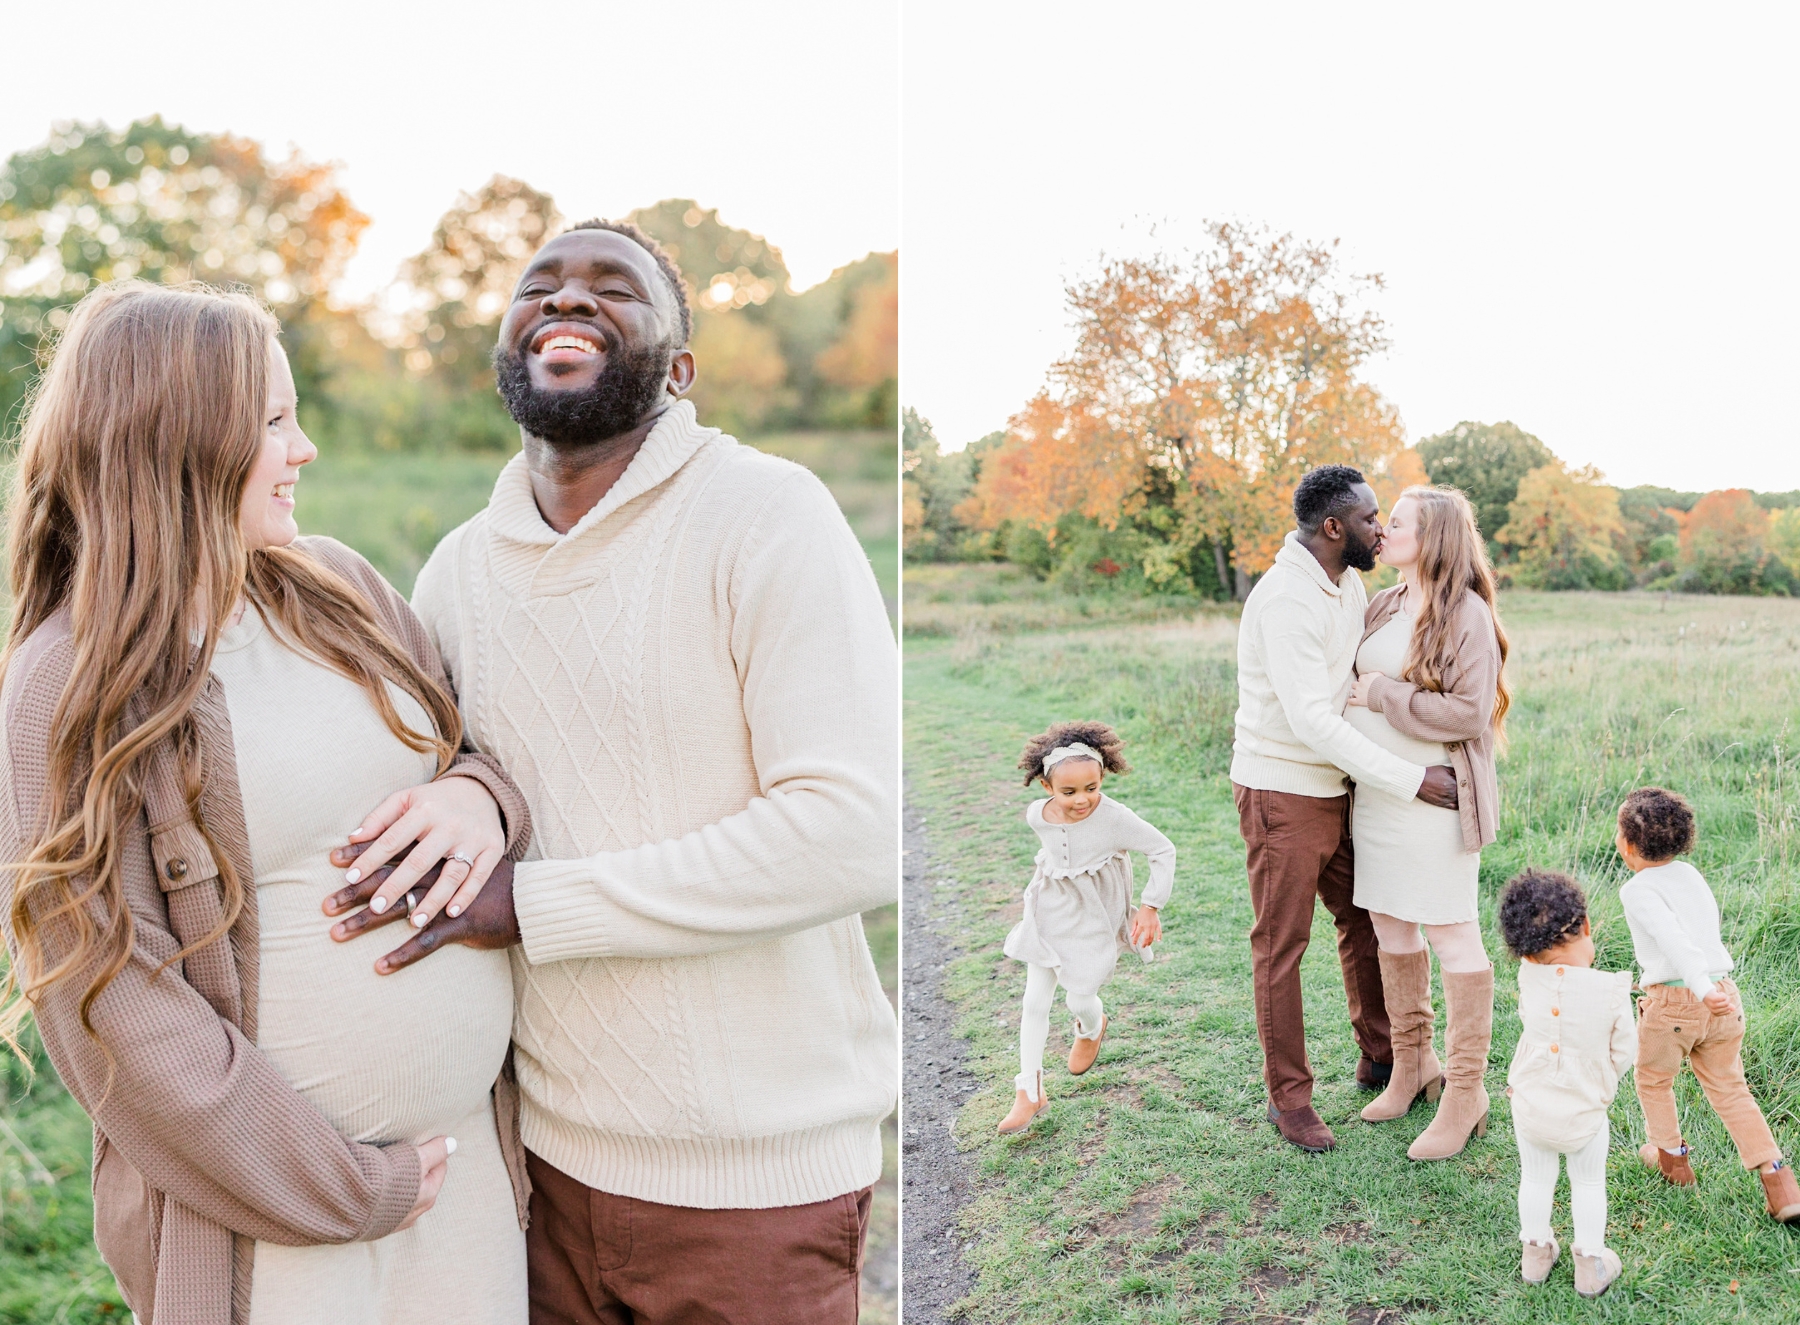 Two images side by side - Pregnant Client from Seven Sisters Midwifery and her husband cradling her bump and laughing together; image two: same pregnant woman kissing her husband while their three children run around them laughing